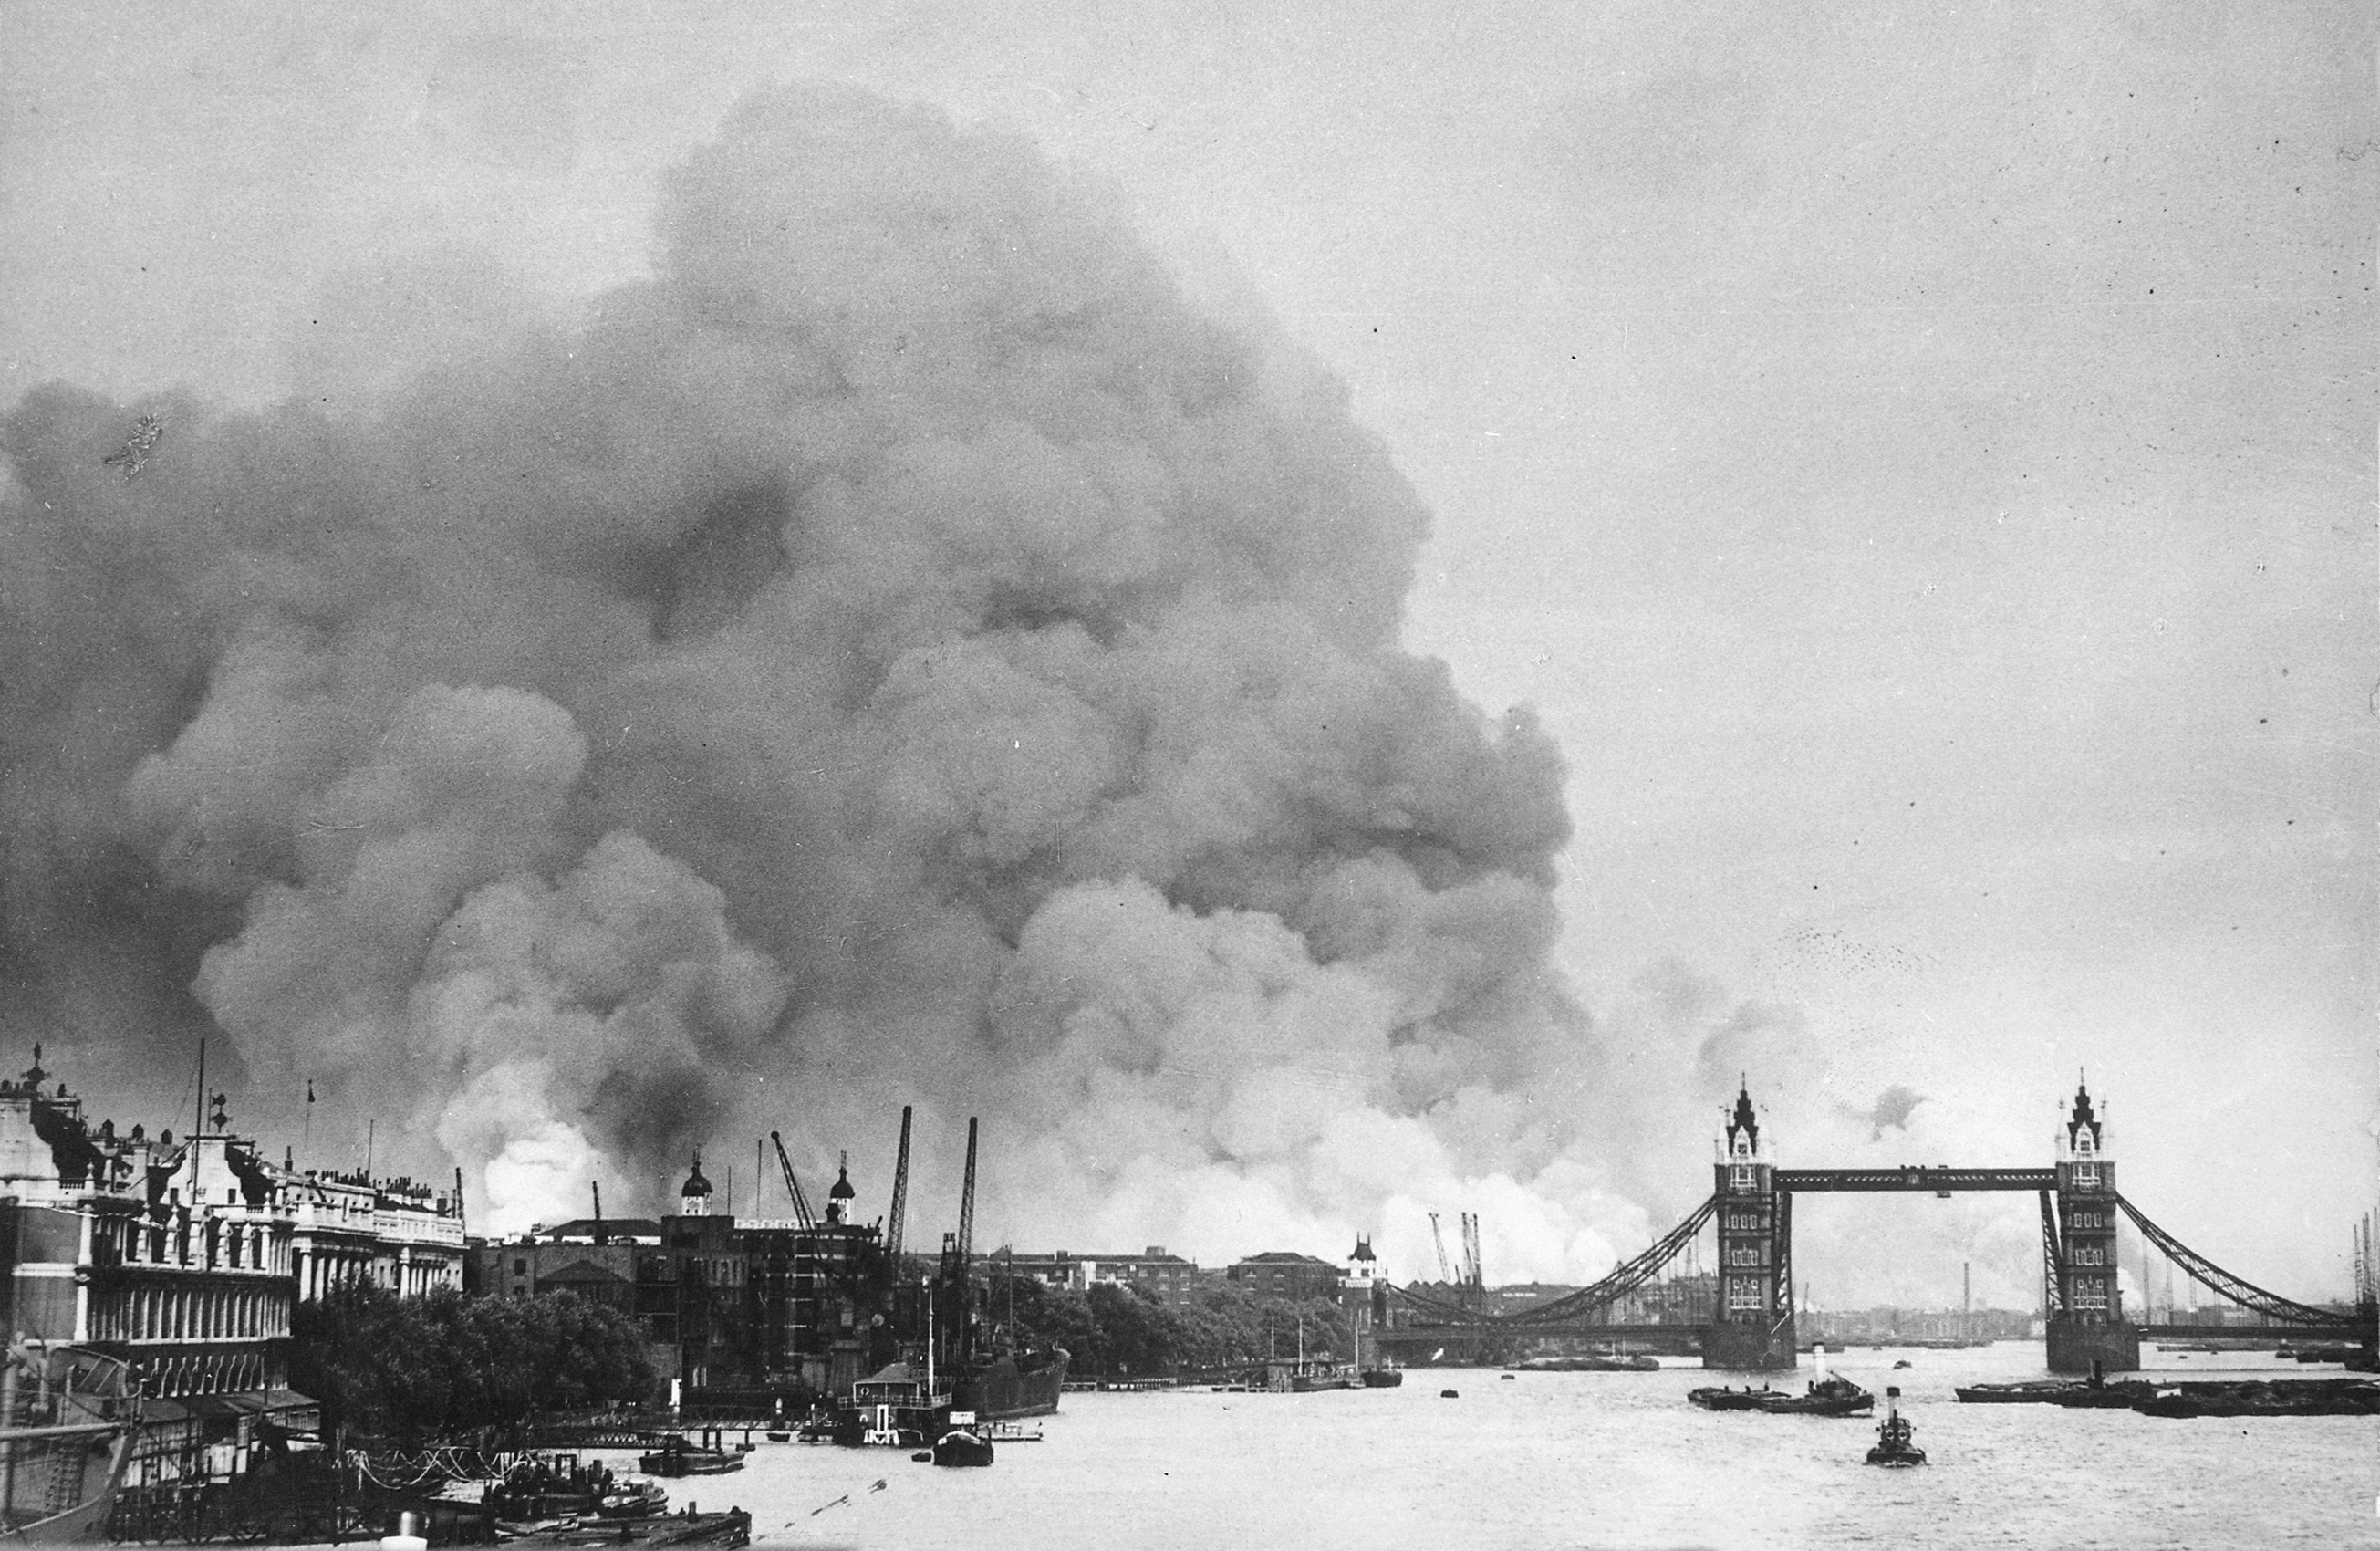 Air raids on England, which Manfred also had to witness.